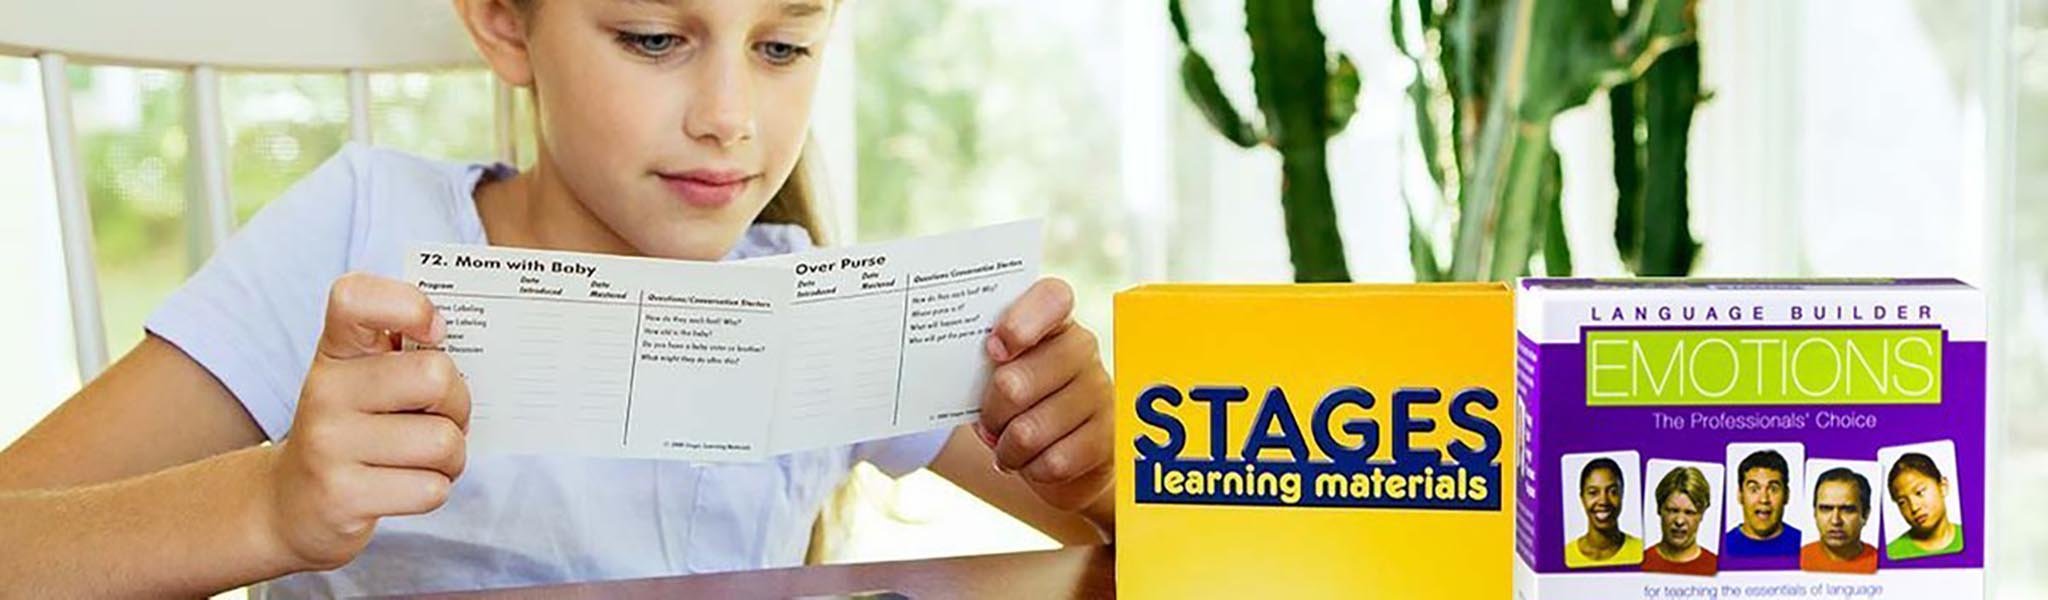 Girl looking at flashcards with set of Language Builder Emotion Cards in the forefront